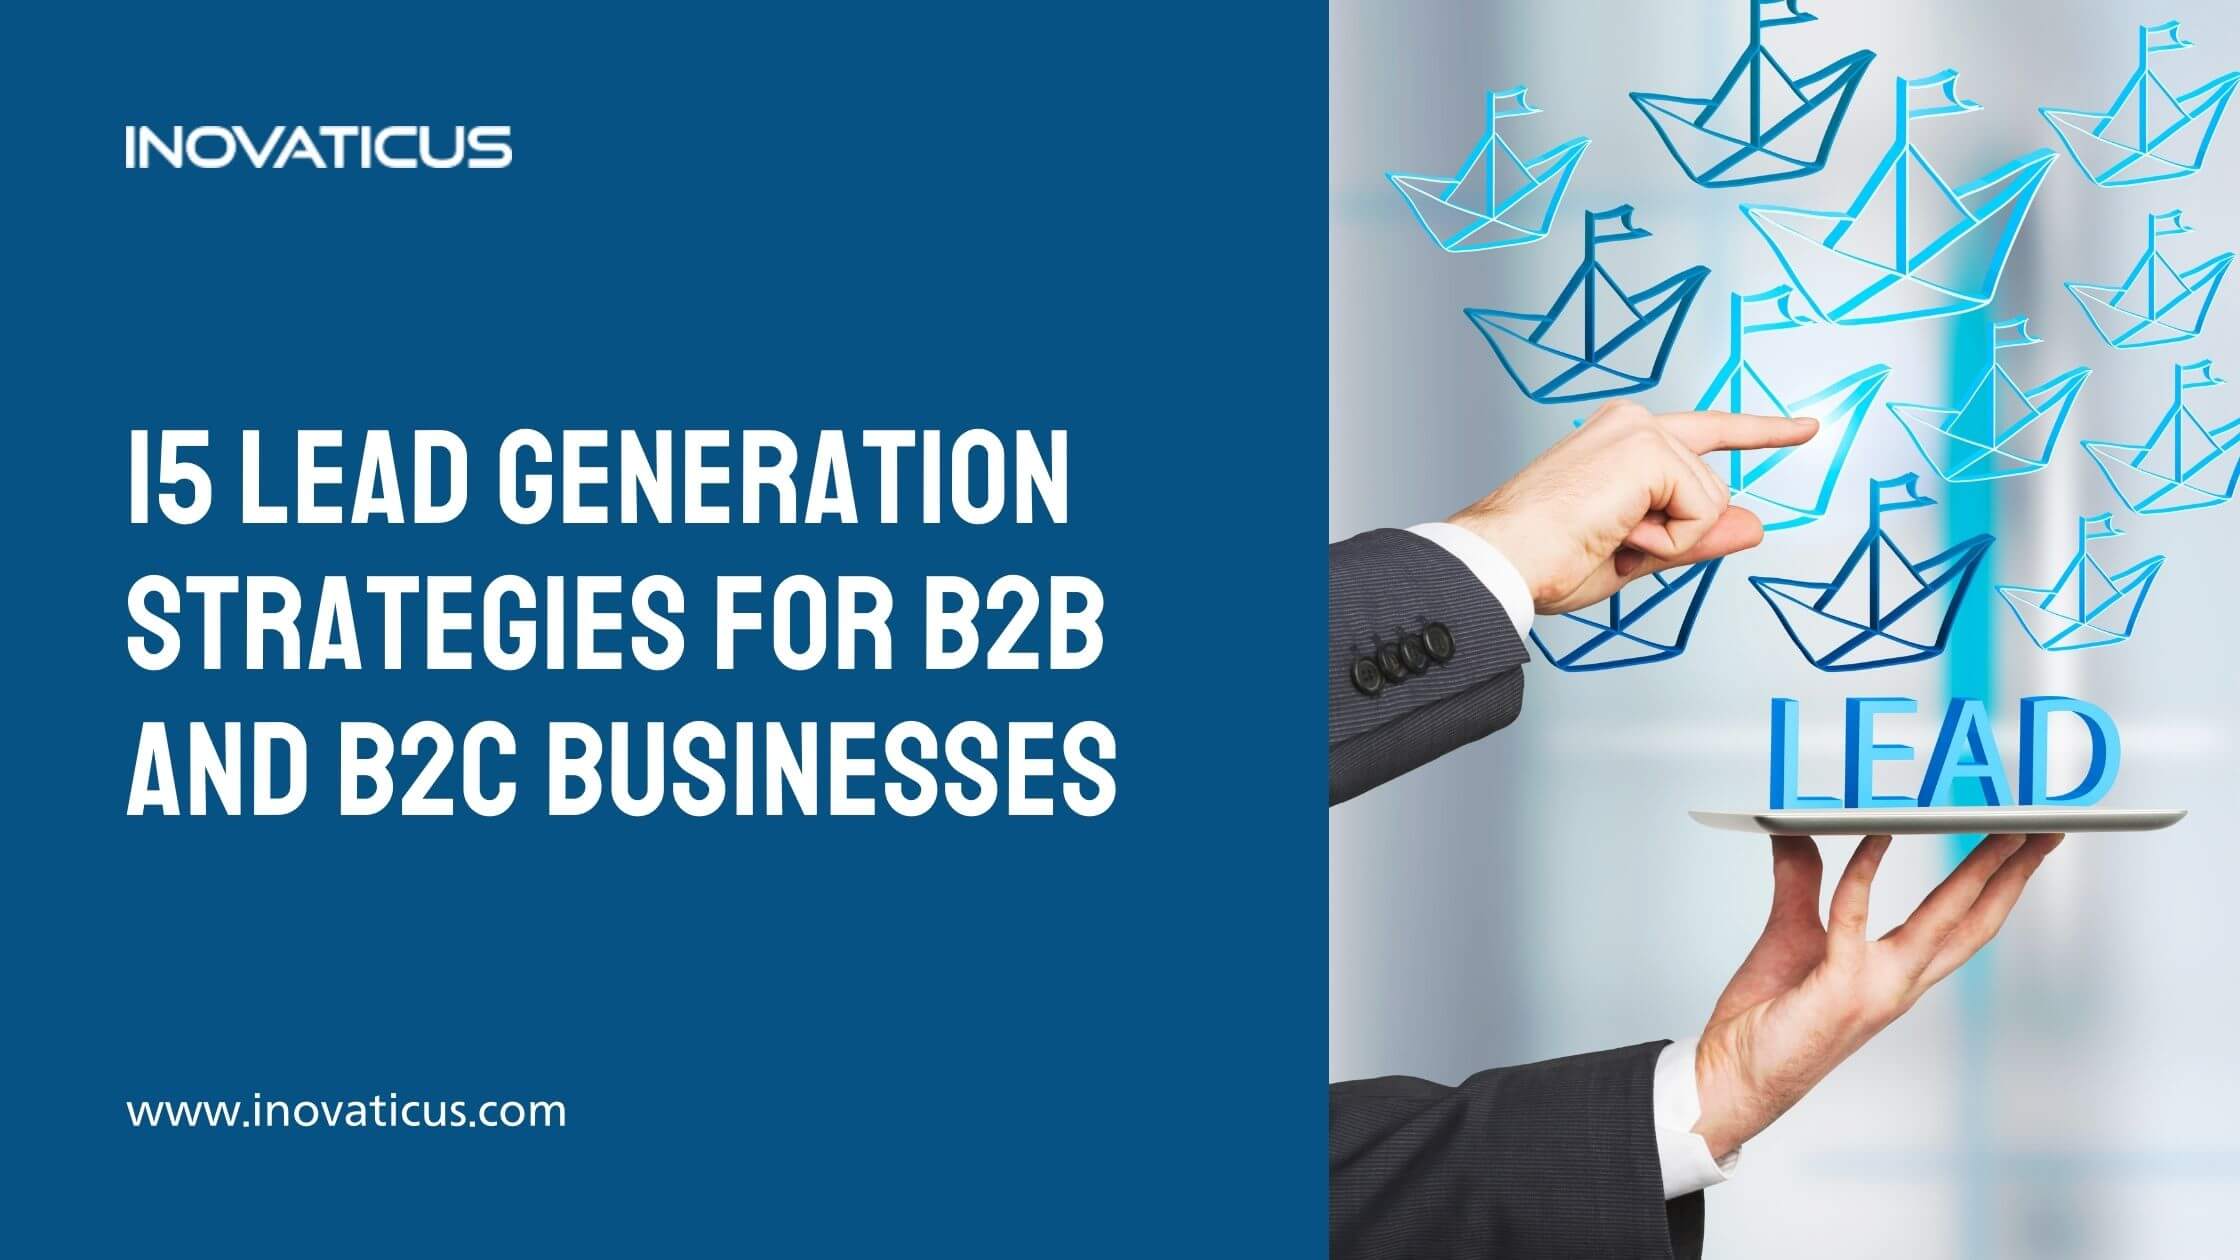 15 Lead Generation Strategies For B2B and B2C Businesses